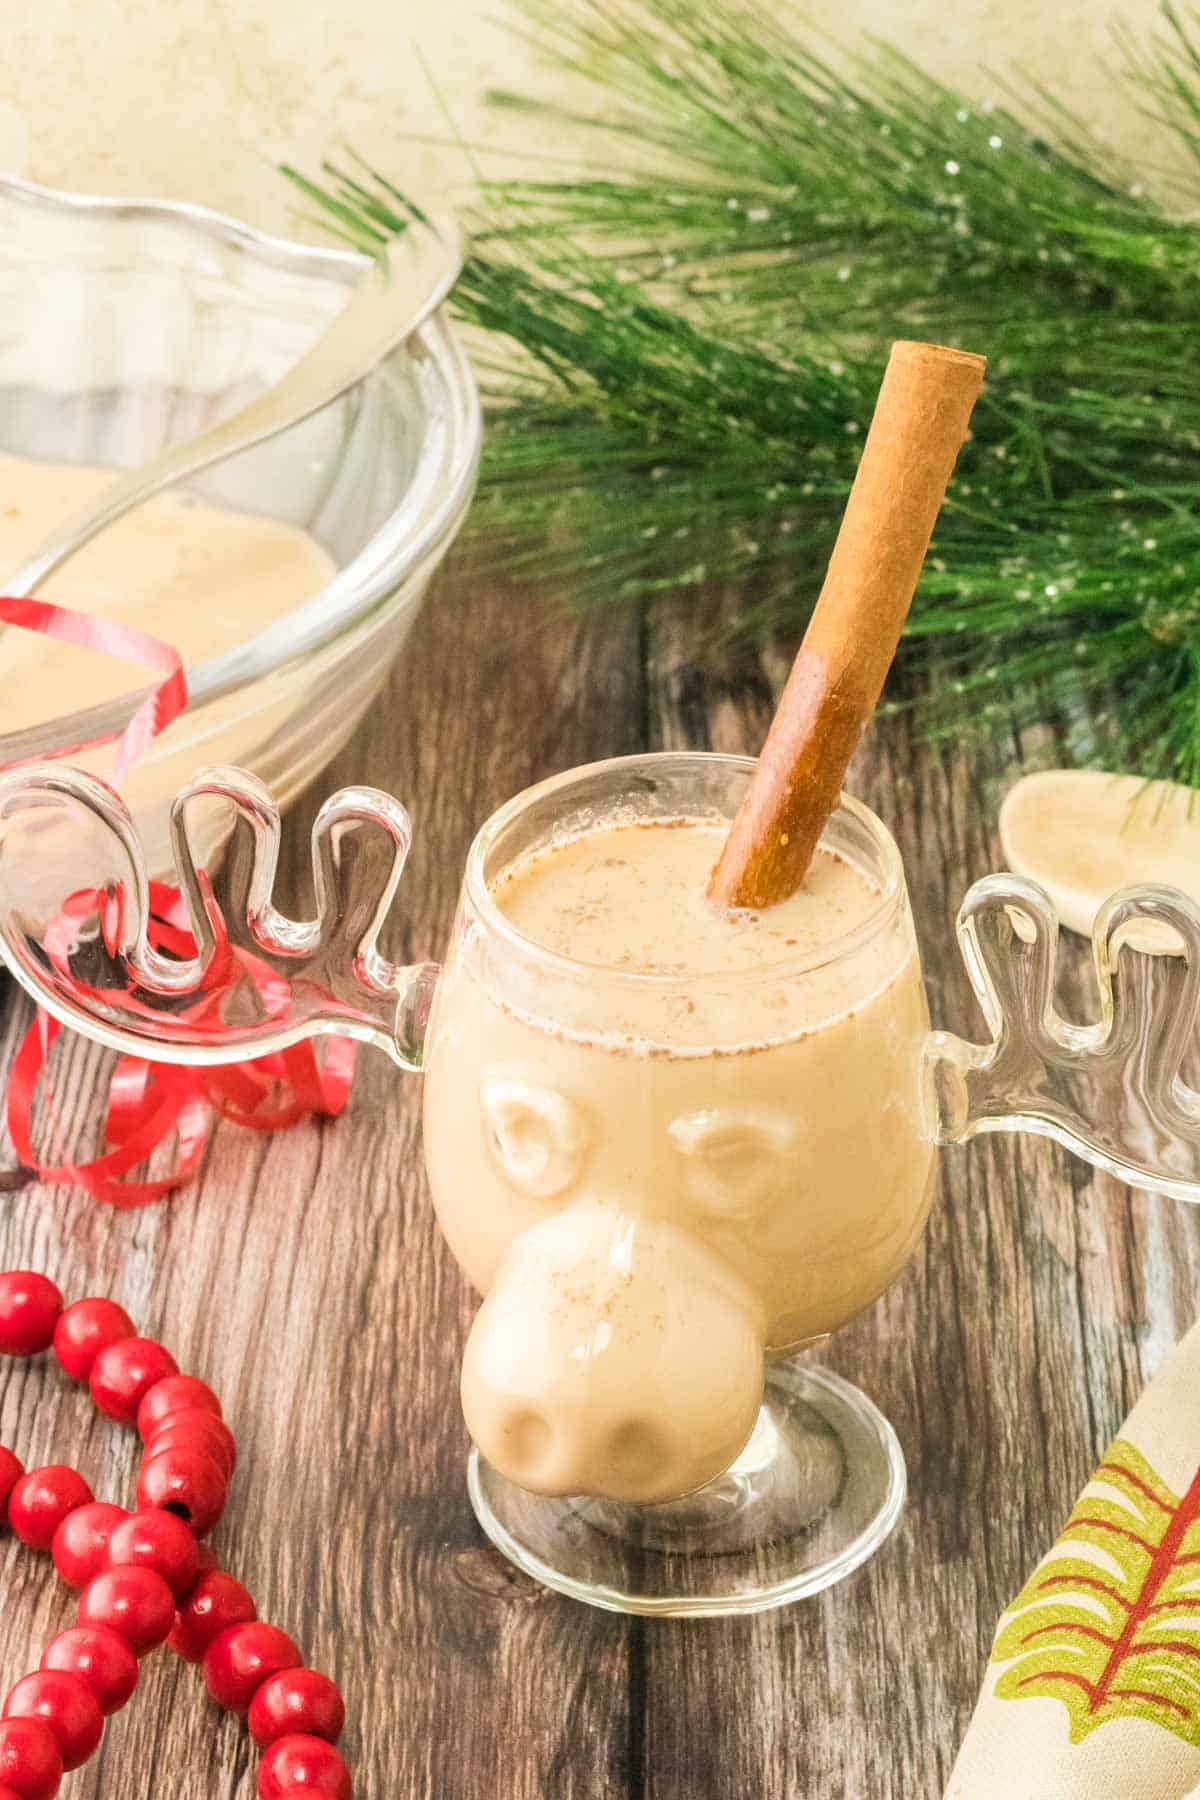 A cup of homemade eggnog in a moose cup garnished with a cinnamon stick.